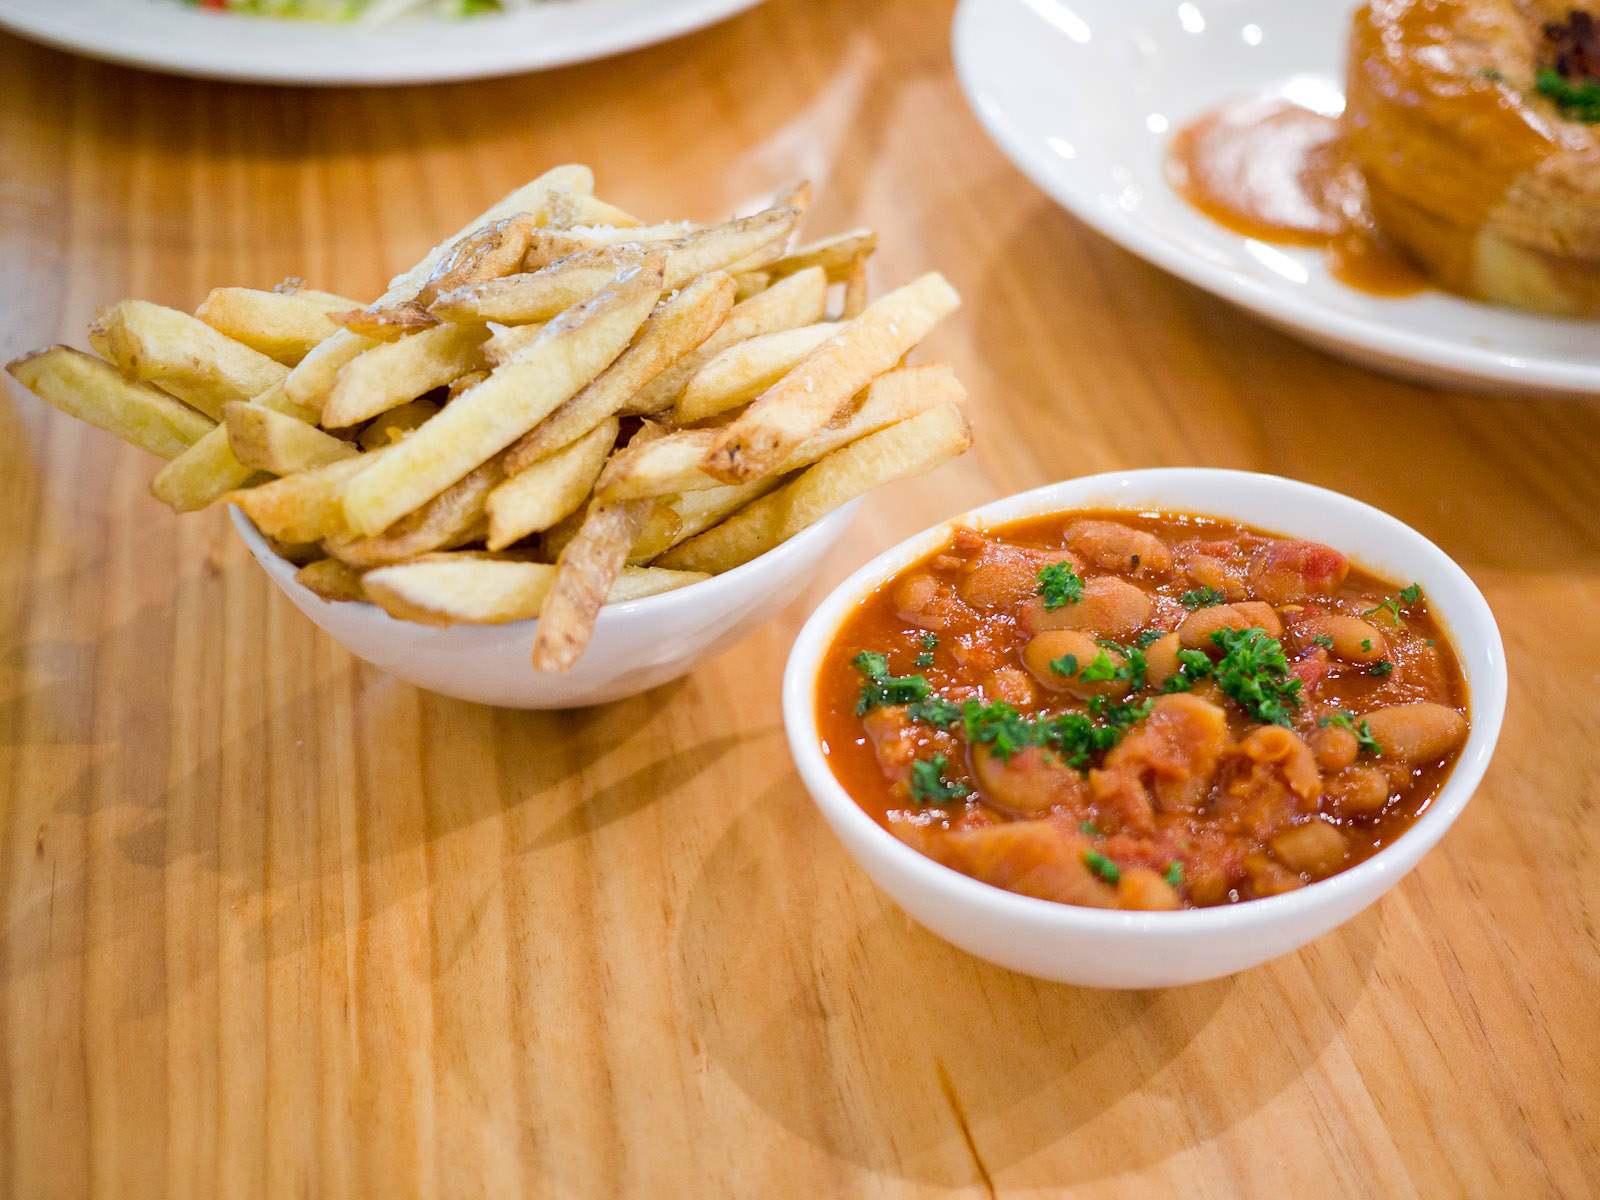 Hand cut chips (AU$4.50) and baked beans with smoked ham hock (AU$5)